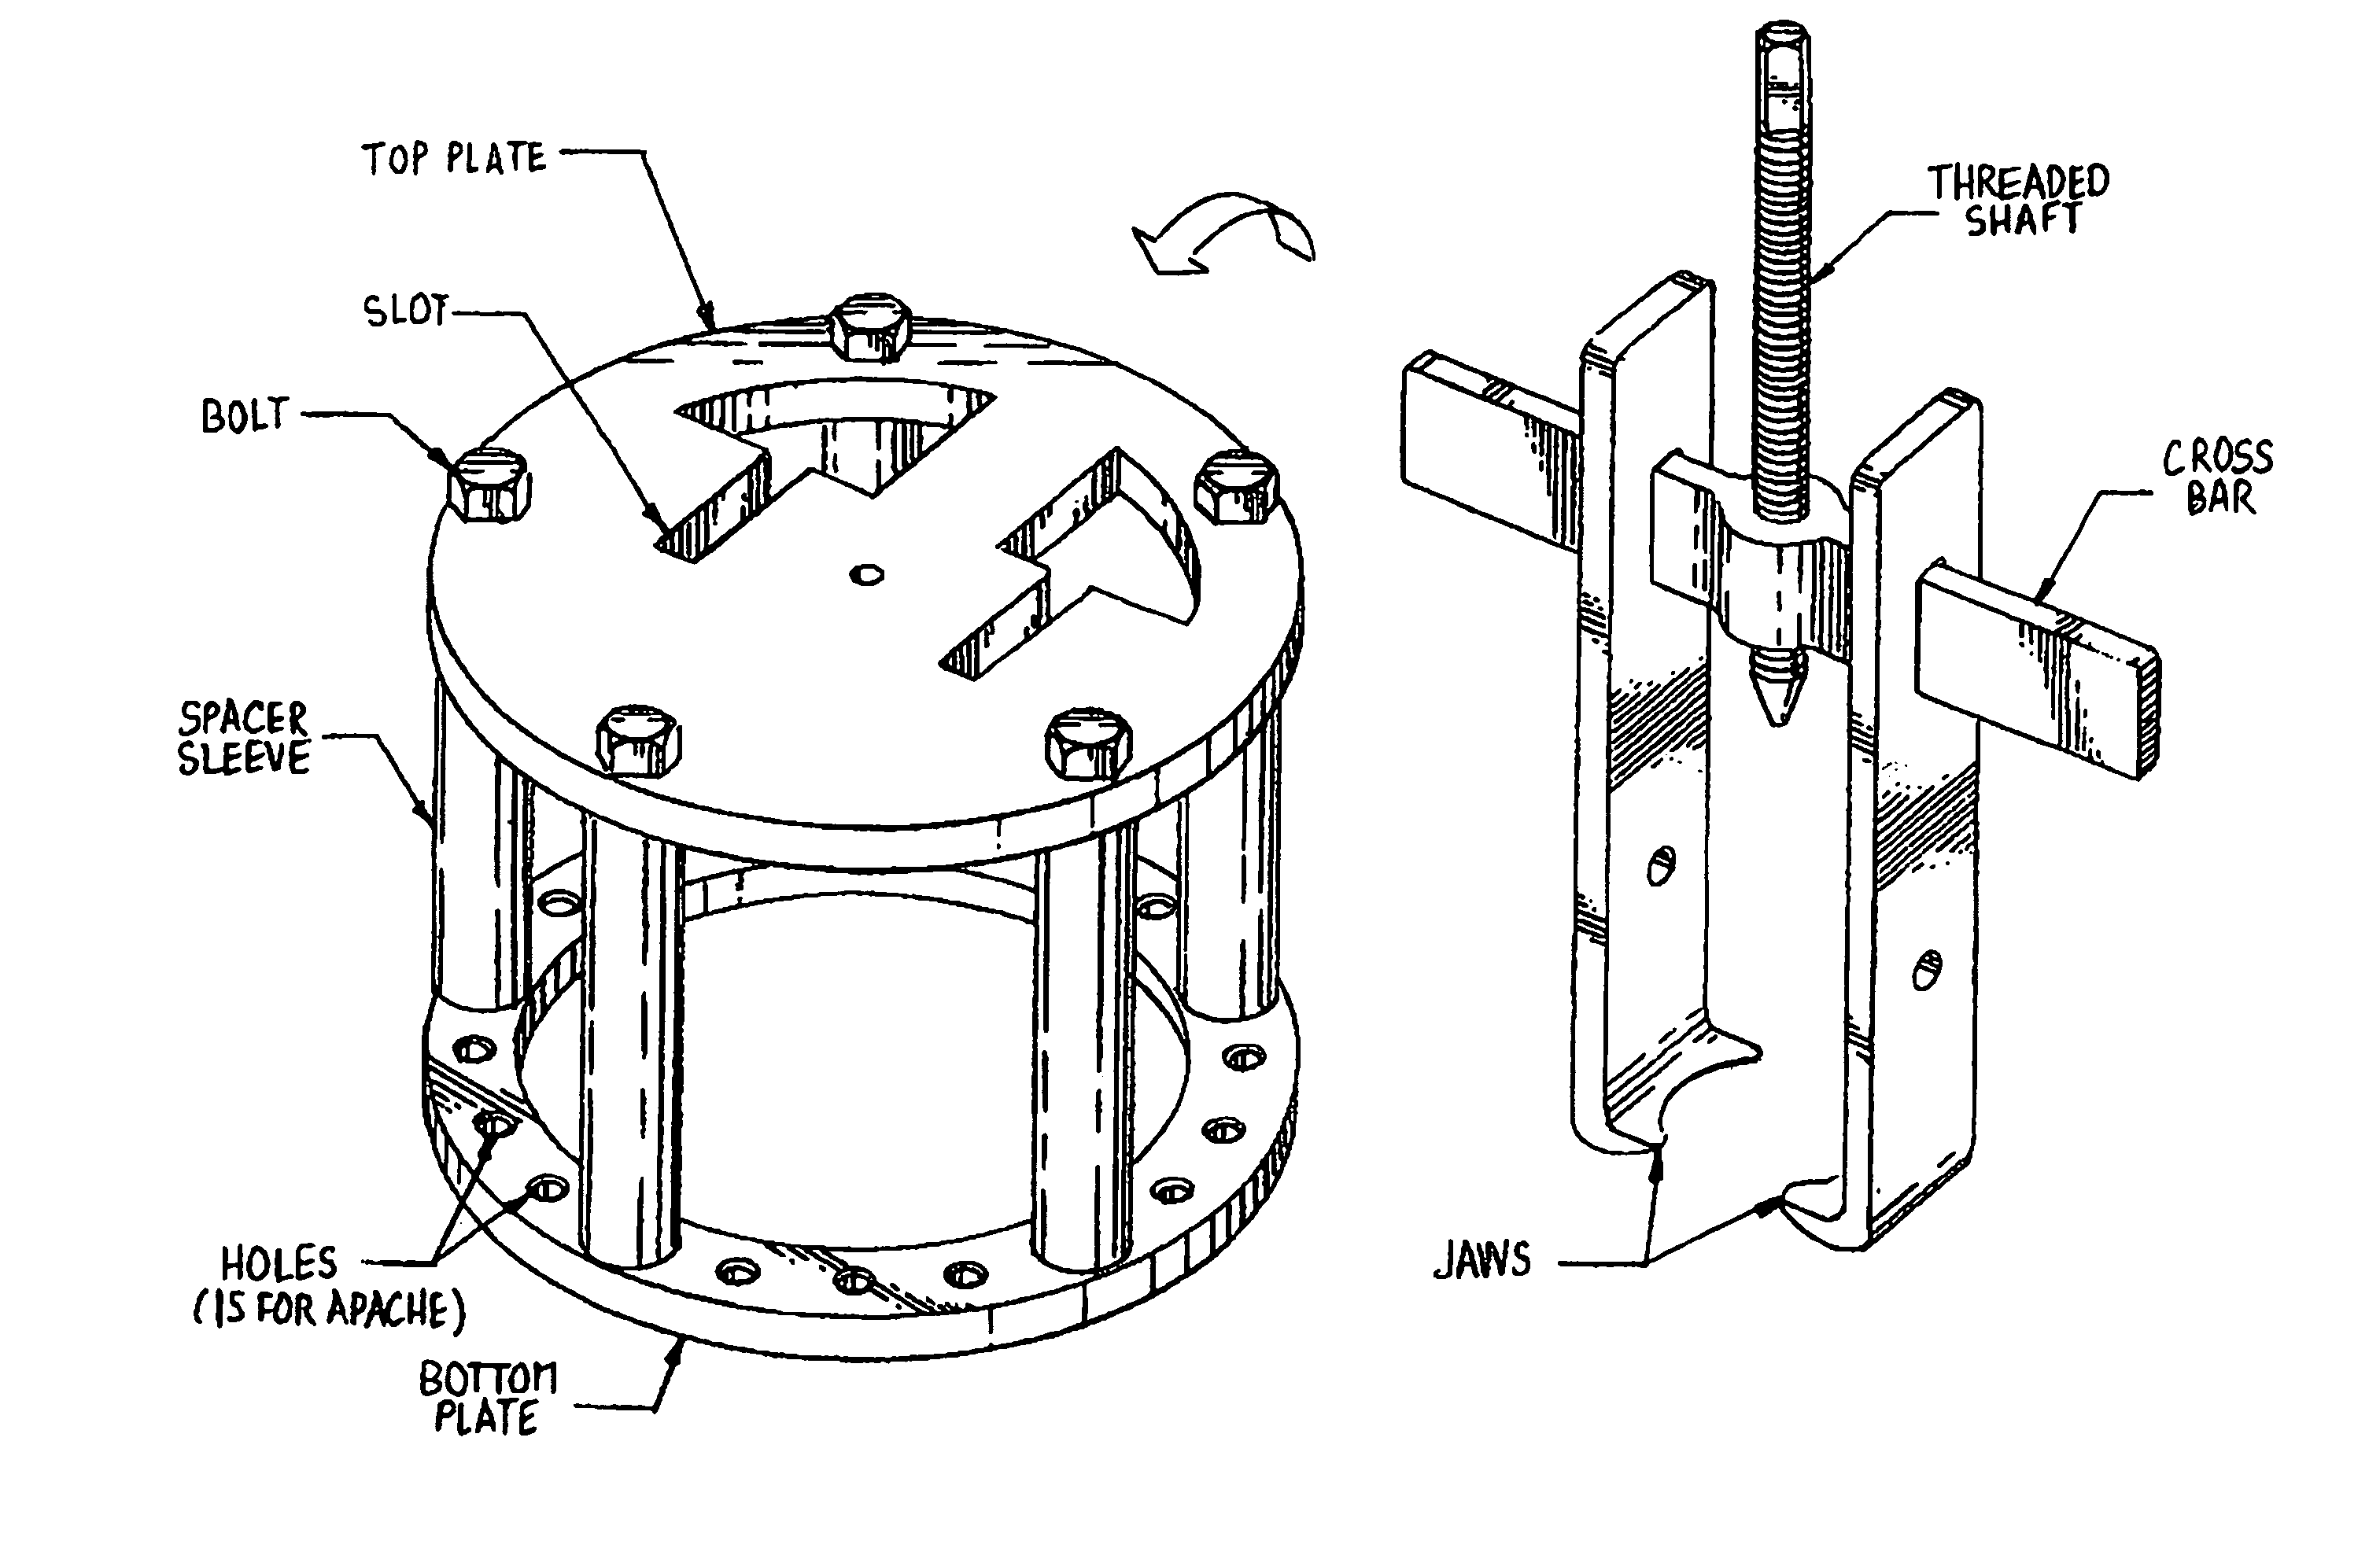 Quill shaft extractor for the 700 series aircraft